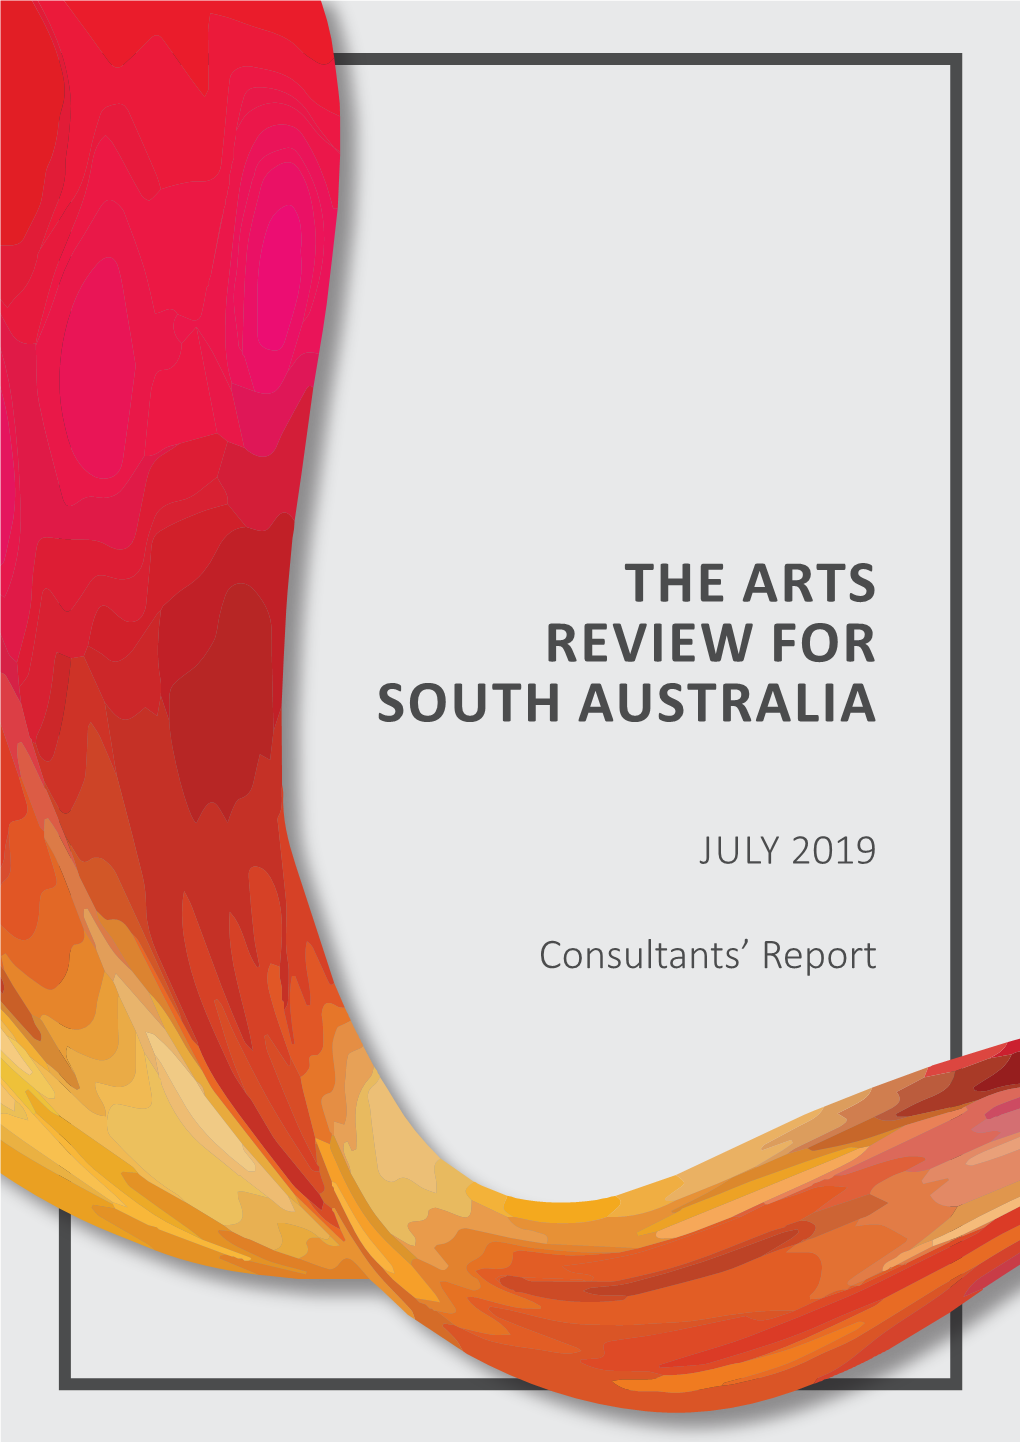 The Arts Review for South Australia